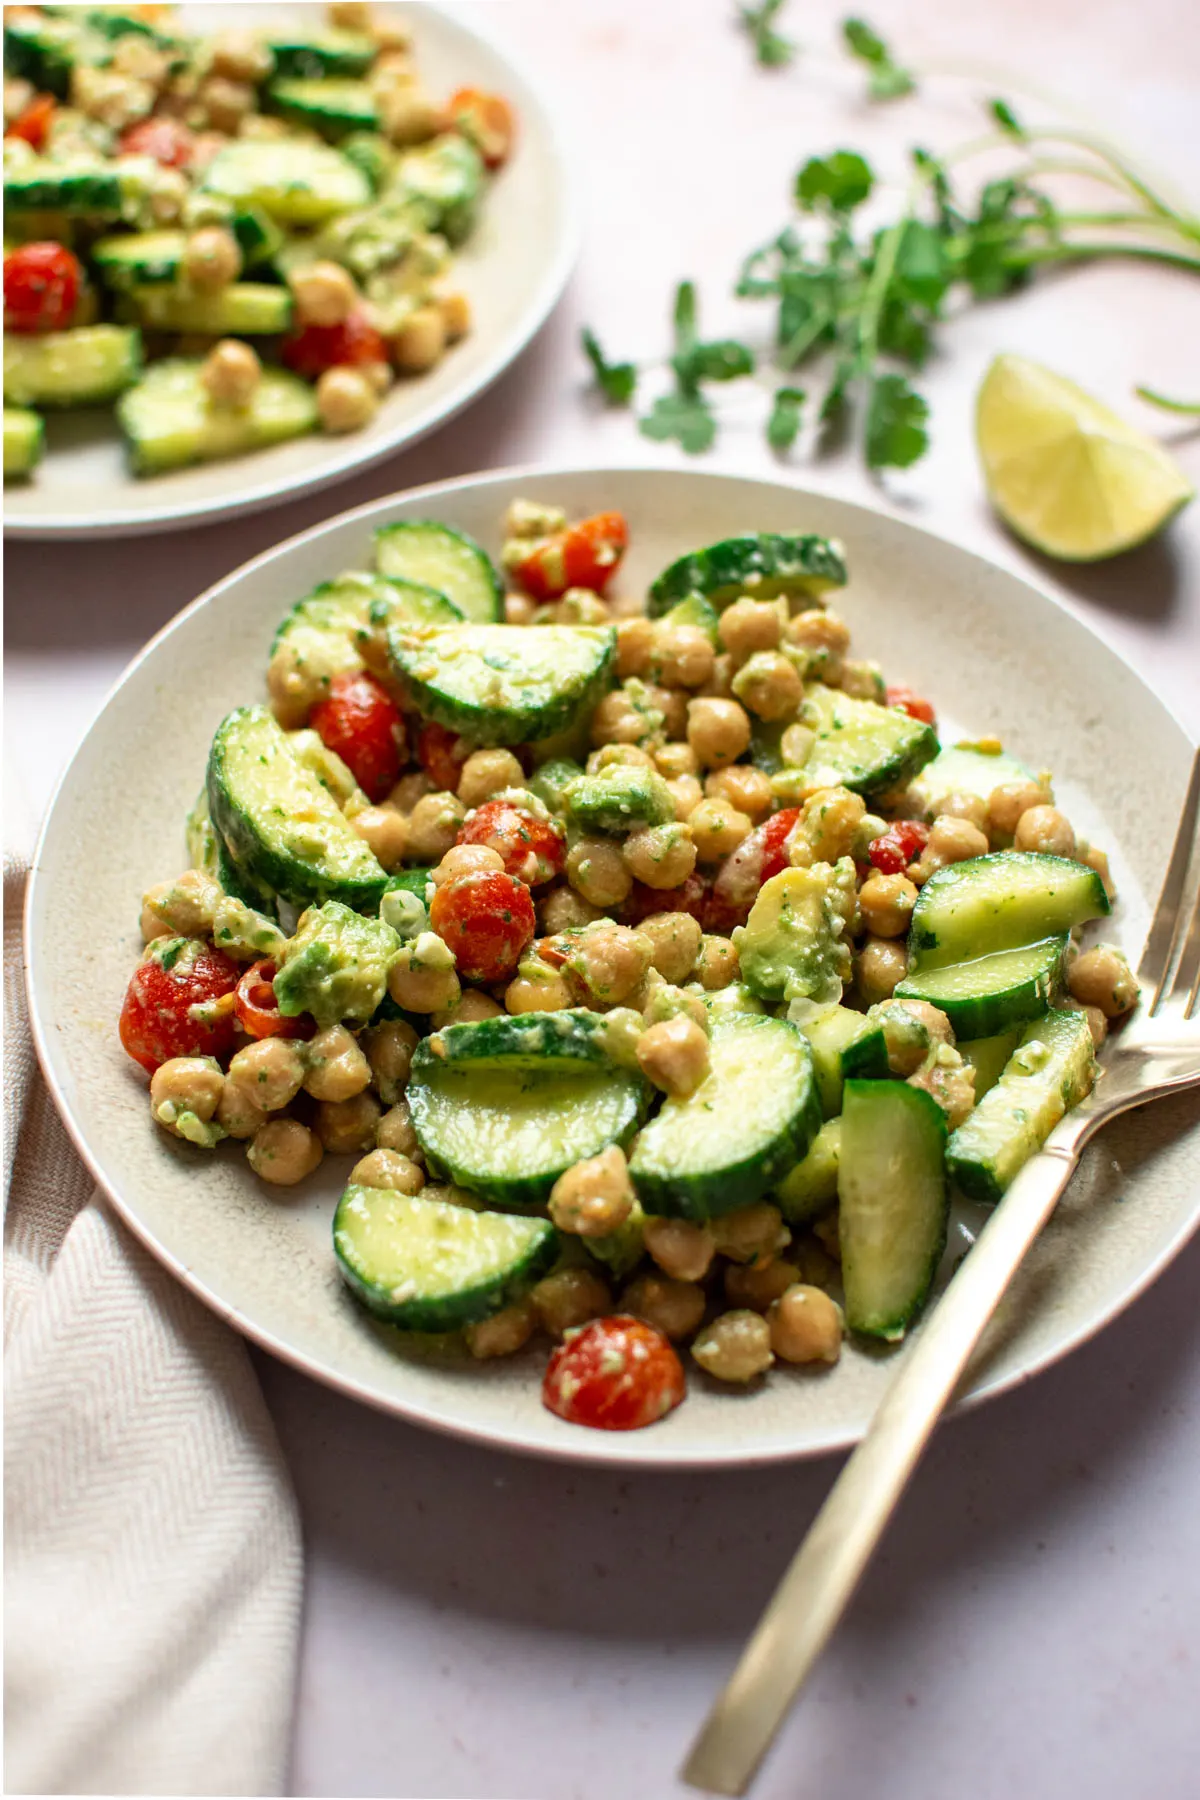 Fork rests on plate of cilantro chickpea salad with tomatoes and cucumbers.